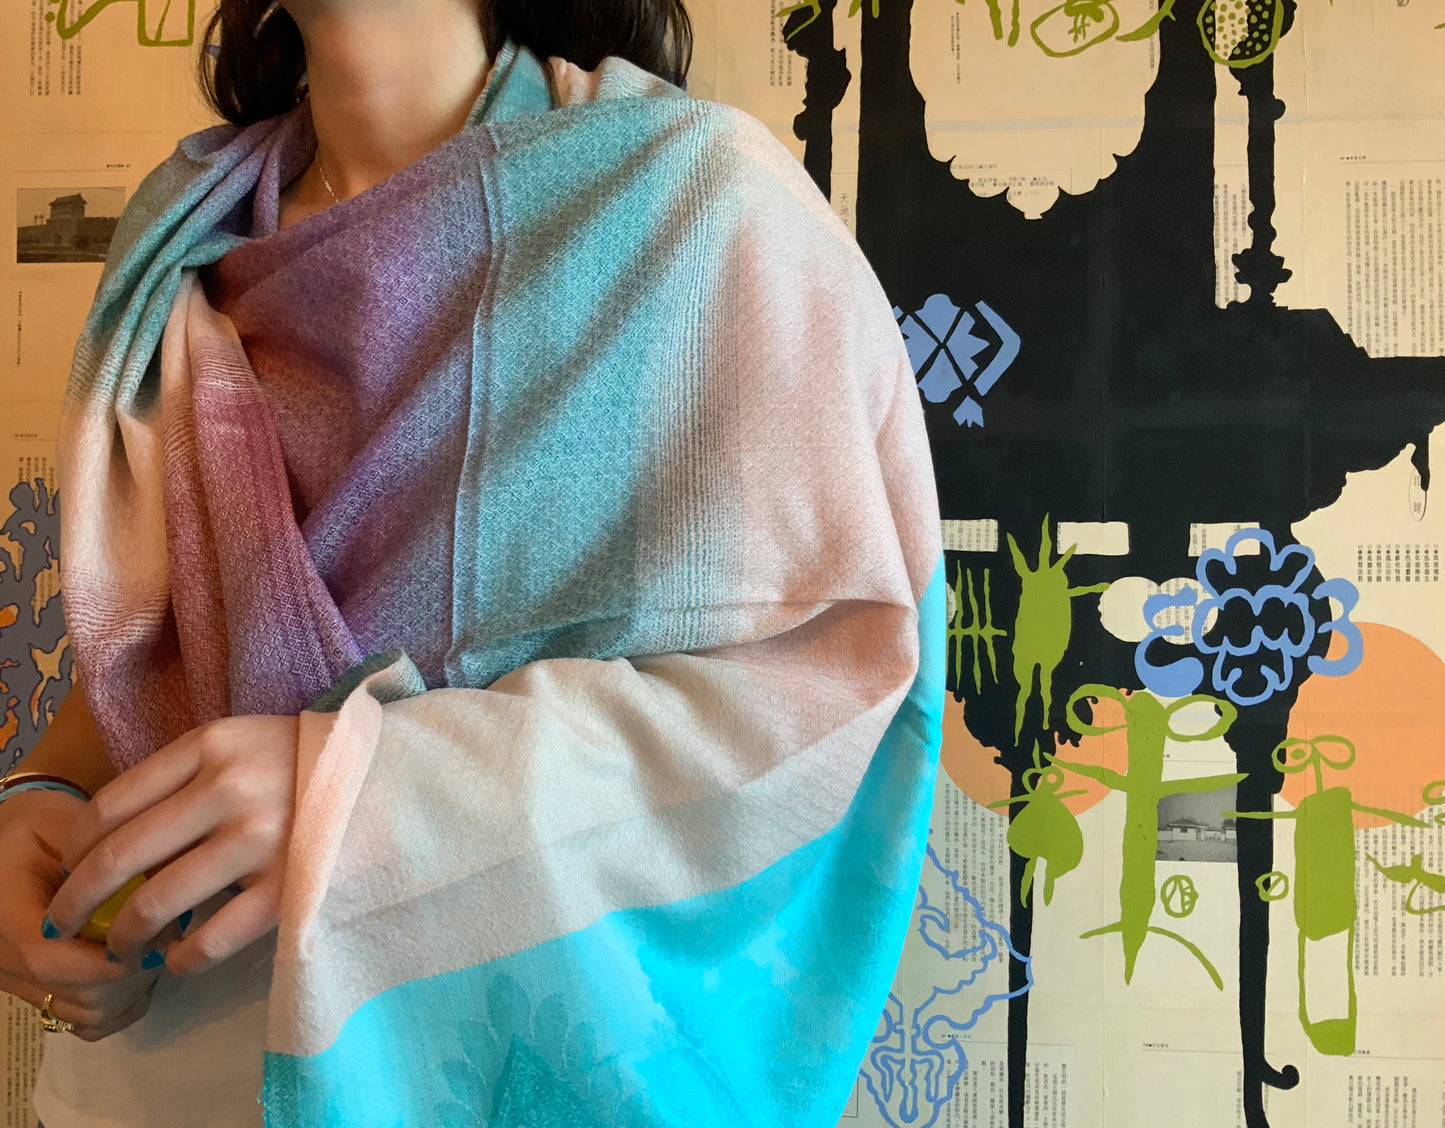 Modern Kashmir shawl in Turquoise, Pink and White #ModernKashmirShawl #NewShawlTrend #KashmirShawl - DharBazaar